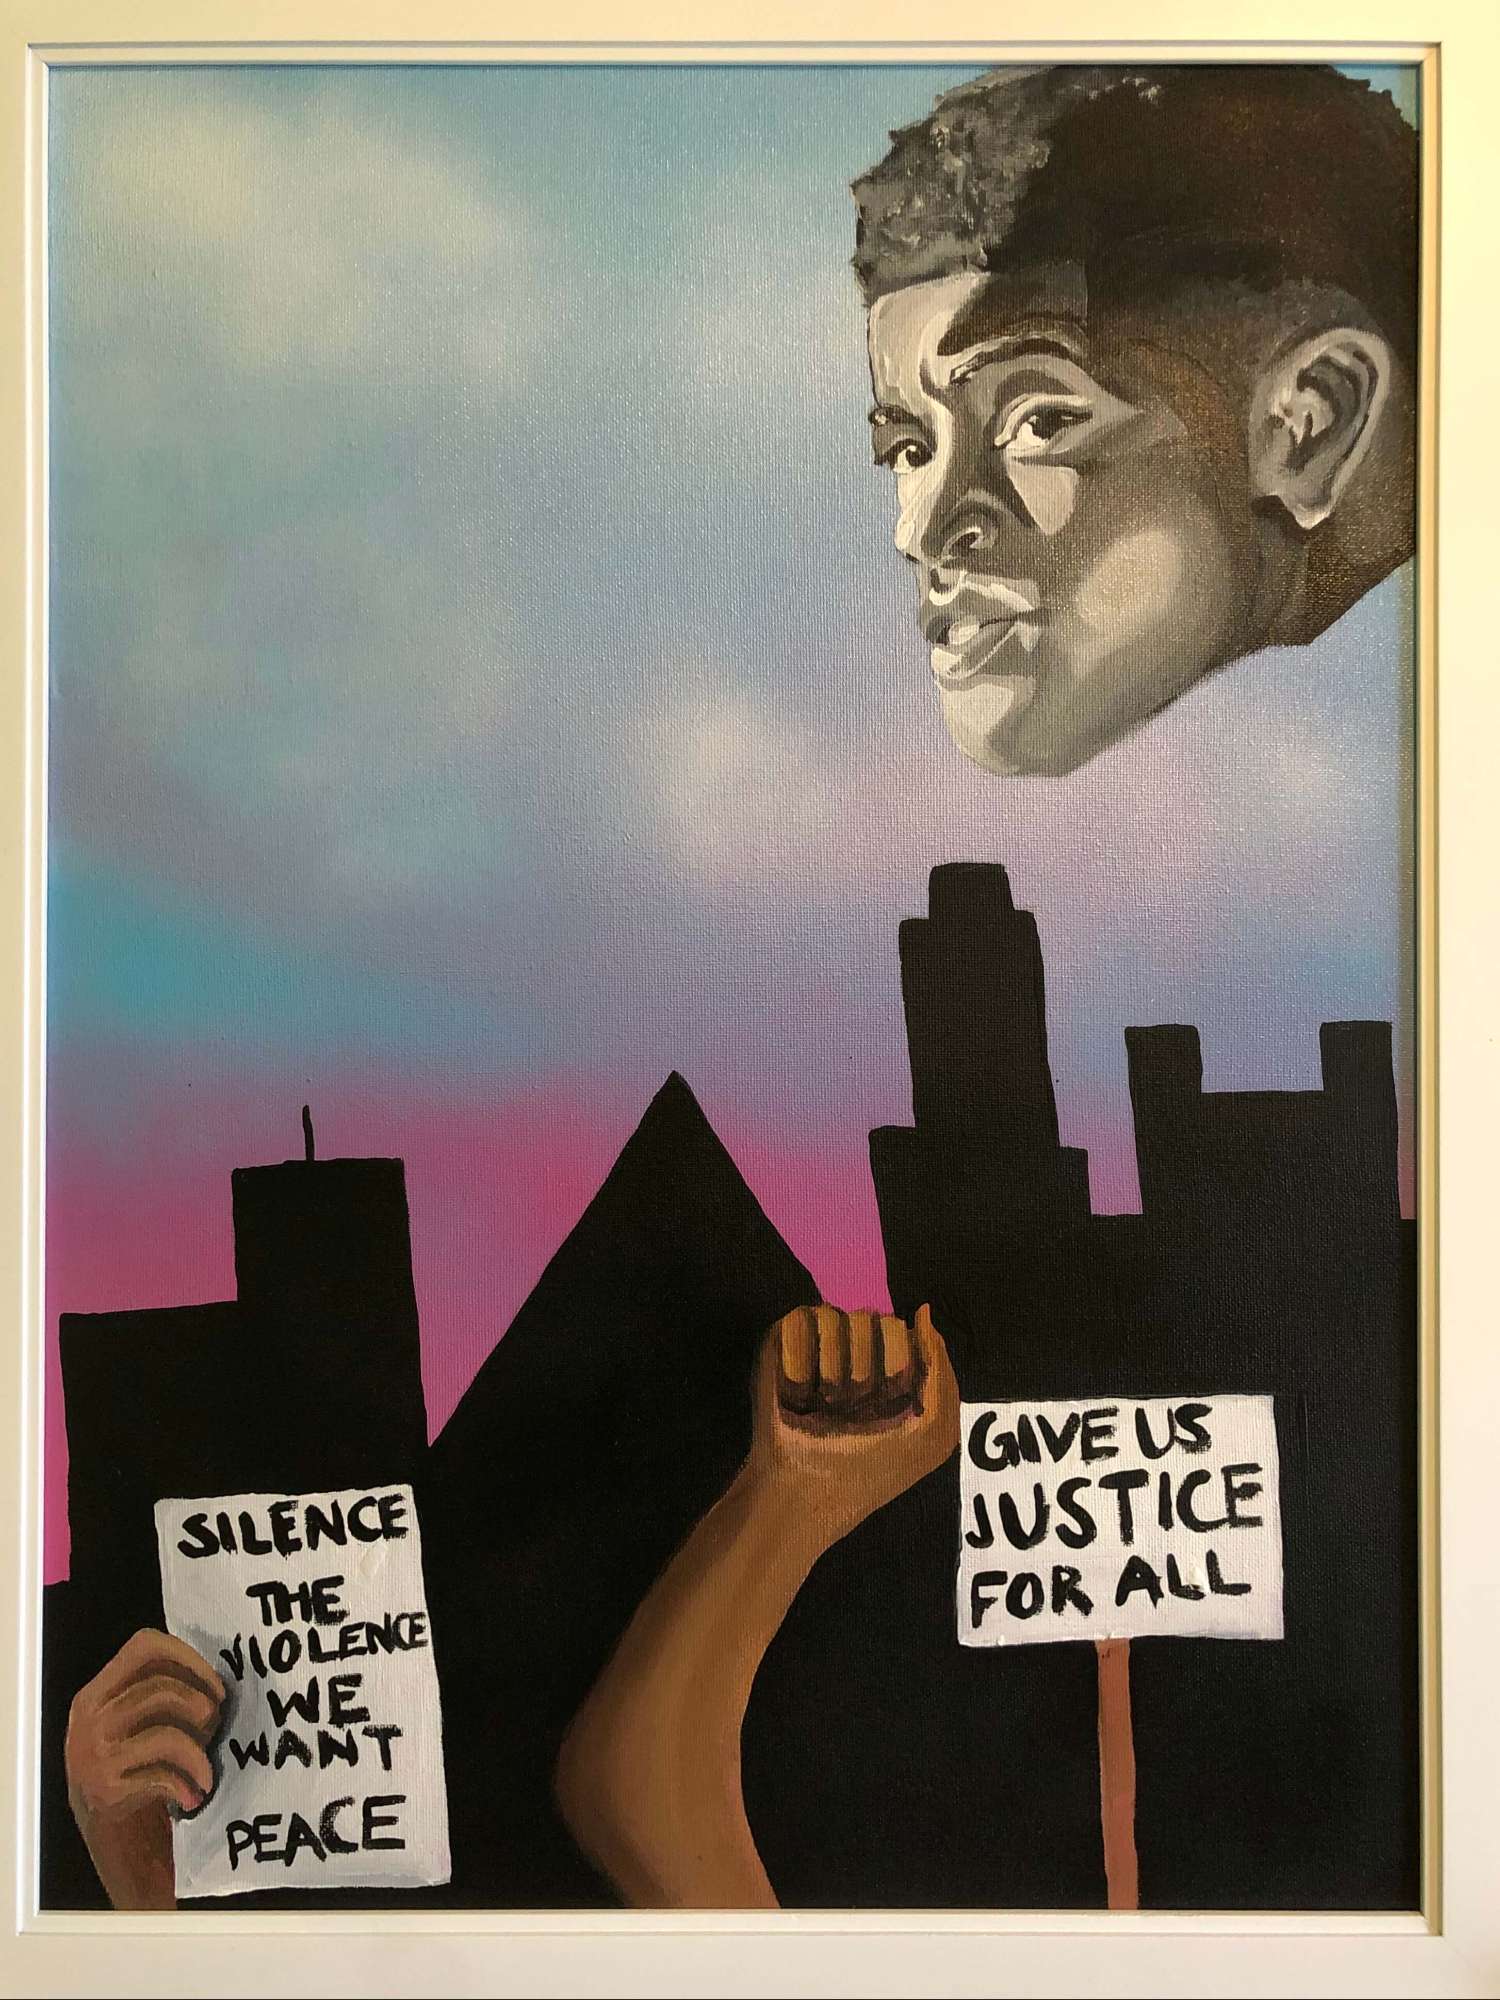 Brandon Luellen.
He’s a Senior in college (Dallas, TX).

When I was given the opportunity to be involved with the Silence the Violence event it was bitter sweet, but also it made me aware of certain things. I was honored to create a piece of art that